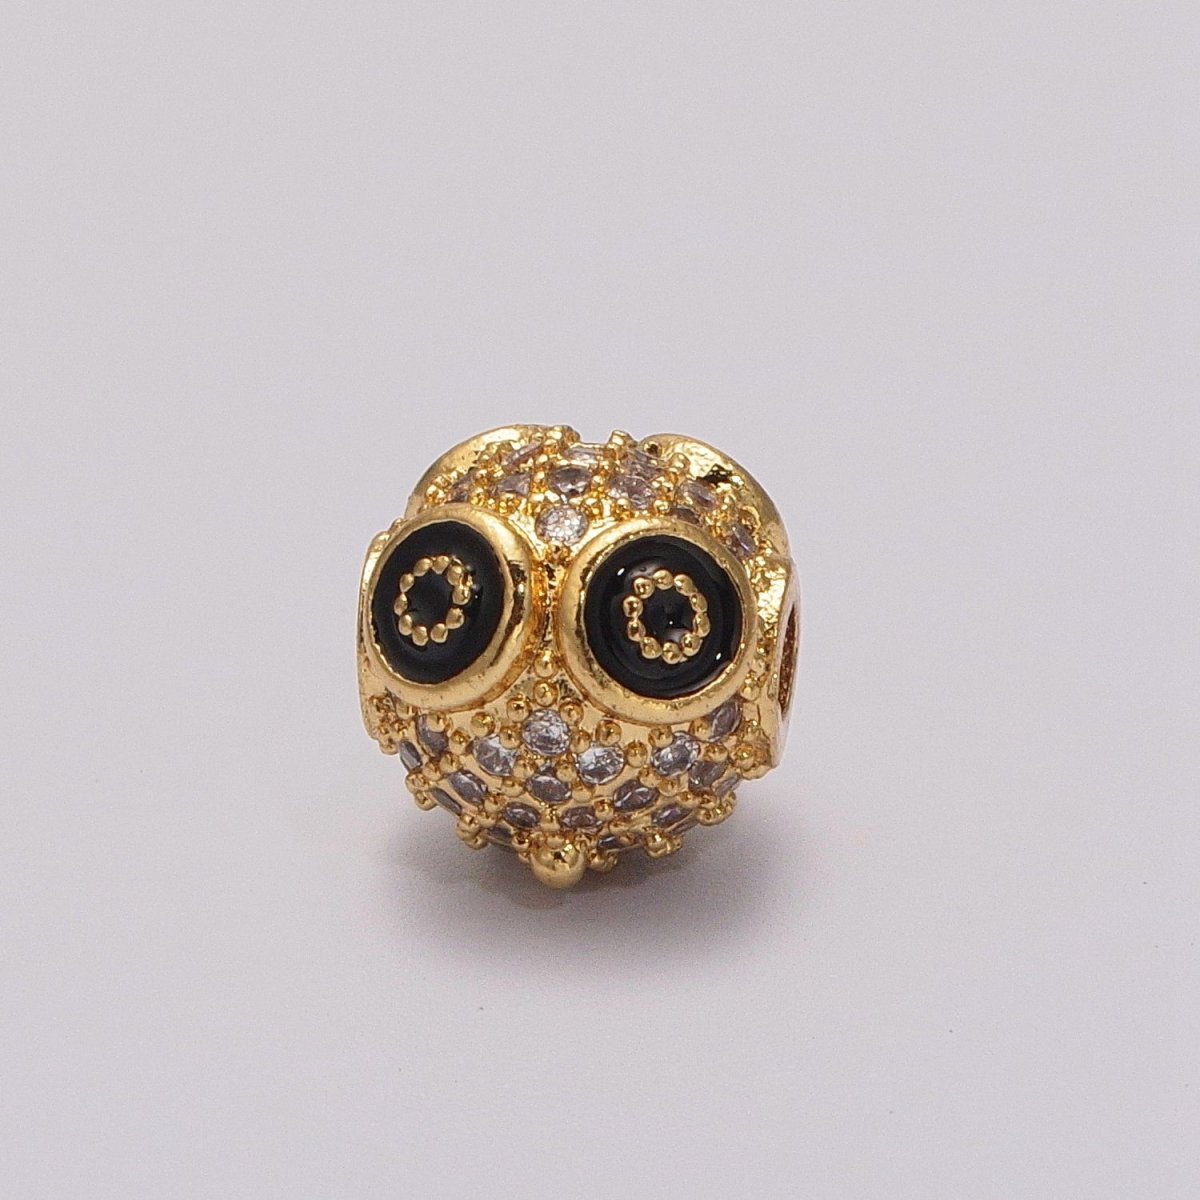 Micro Pave Gold Owl spacer bead Charm for beaded bracelet Making Supply Owl Head Bead 9mm with small hole B-641 to B-644 - DLUXCA